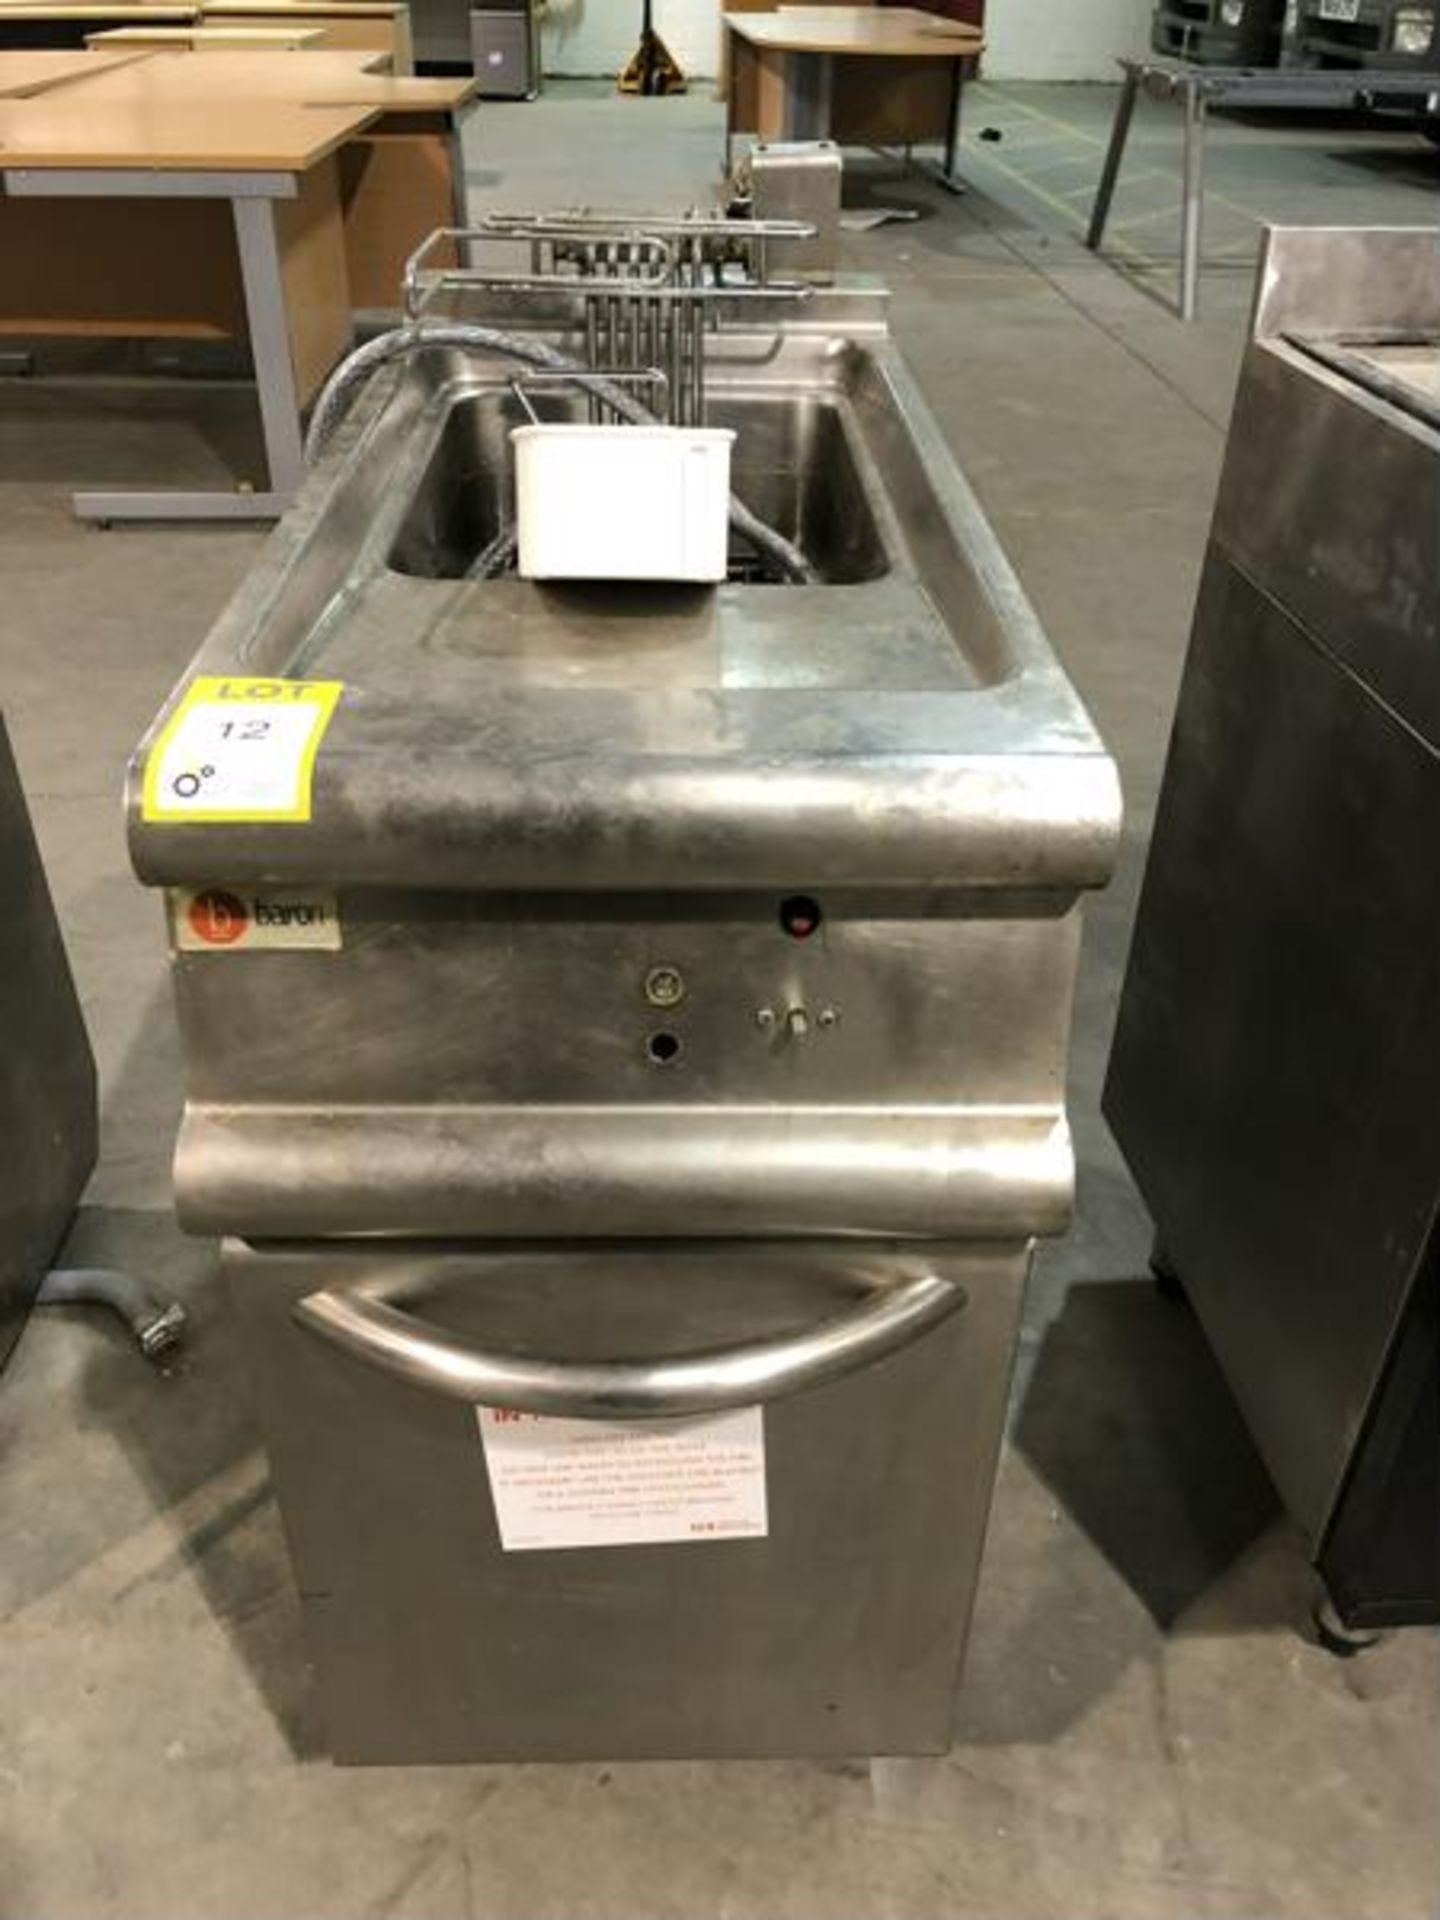 Baron stainless steel electric Deep Fat Fryer (no basket)